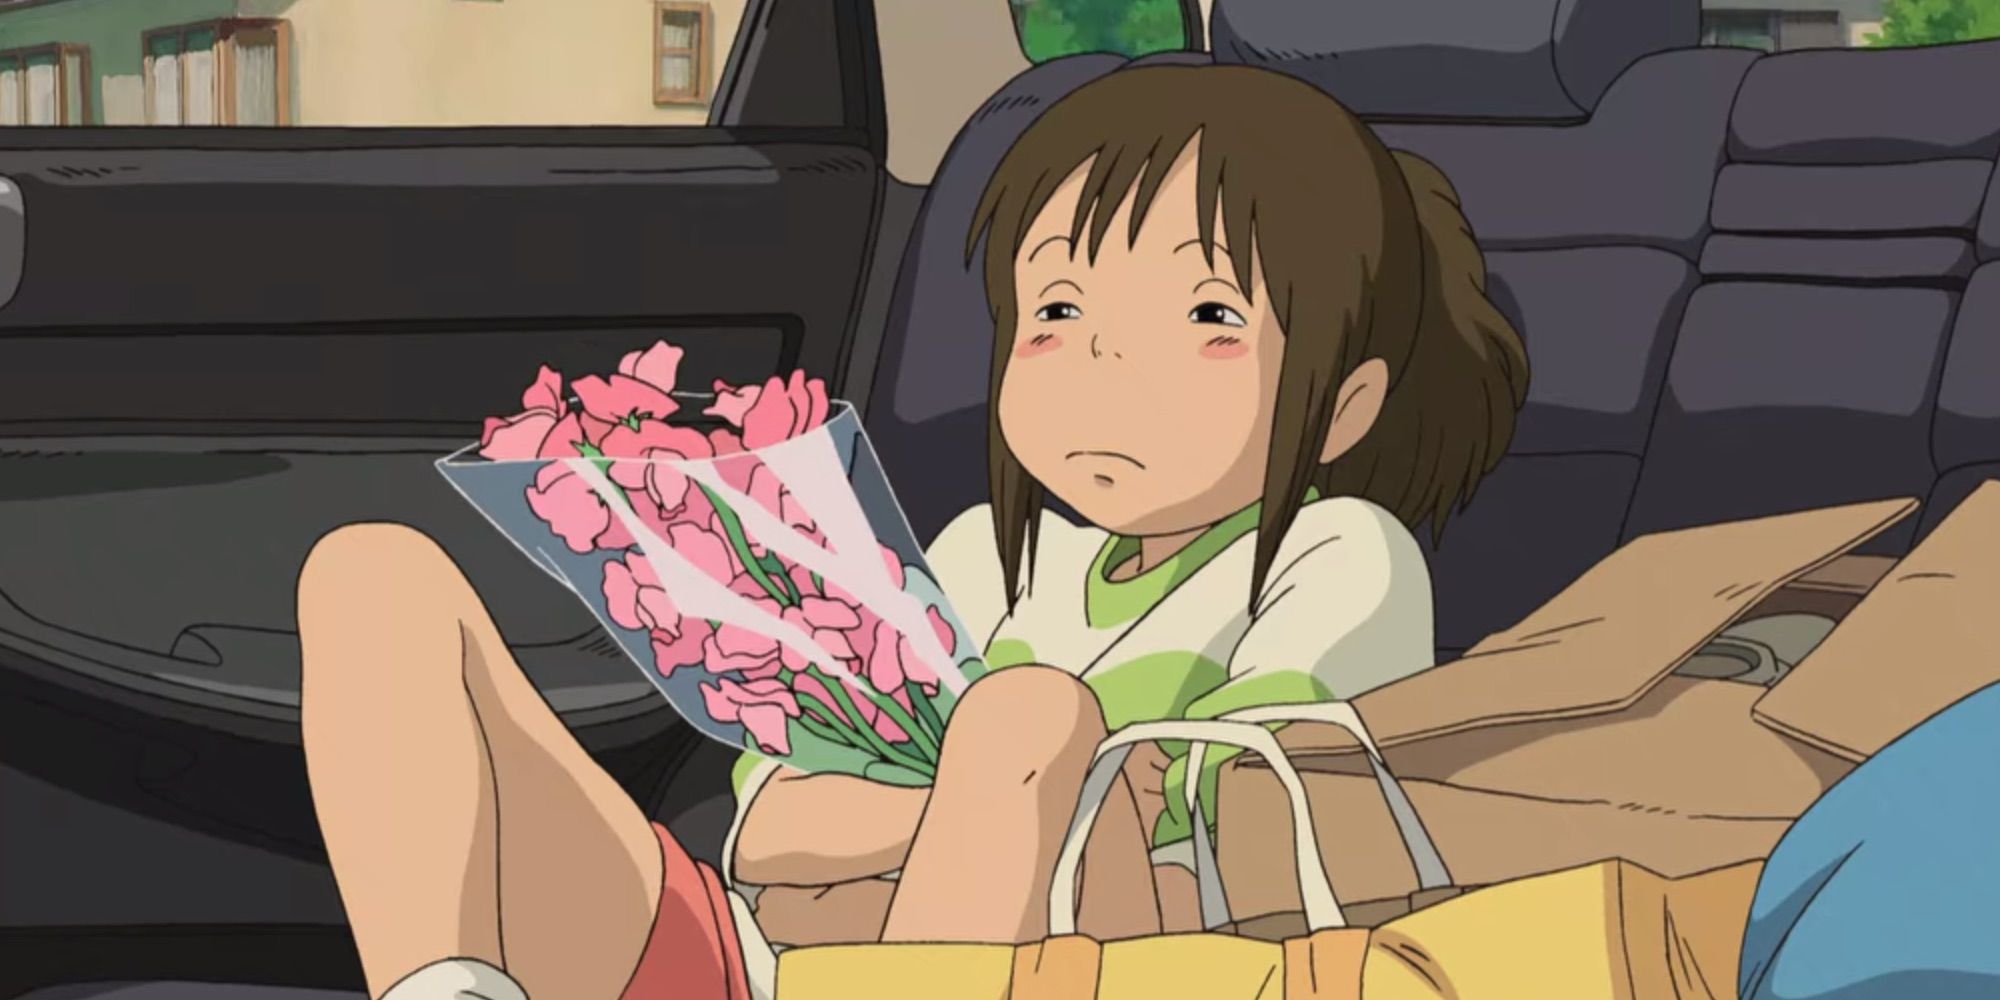 Chihiro in the backseat of the car, arms crossed, in Spirited Away